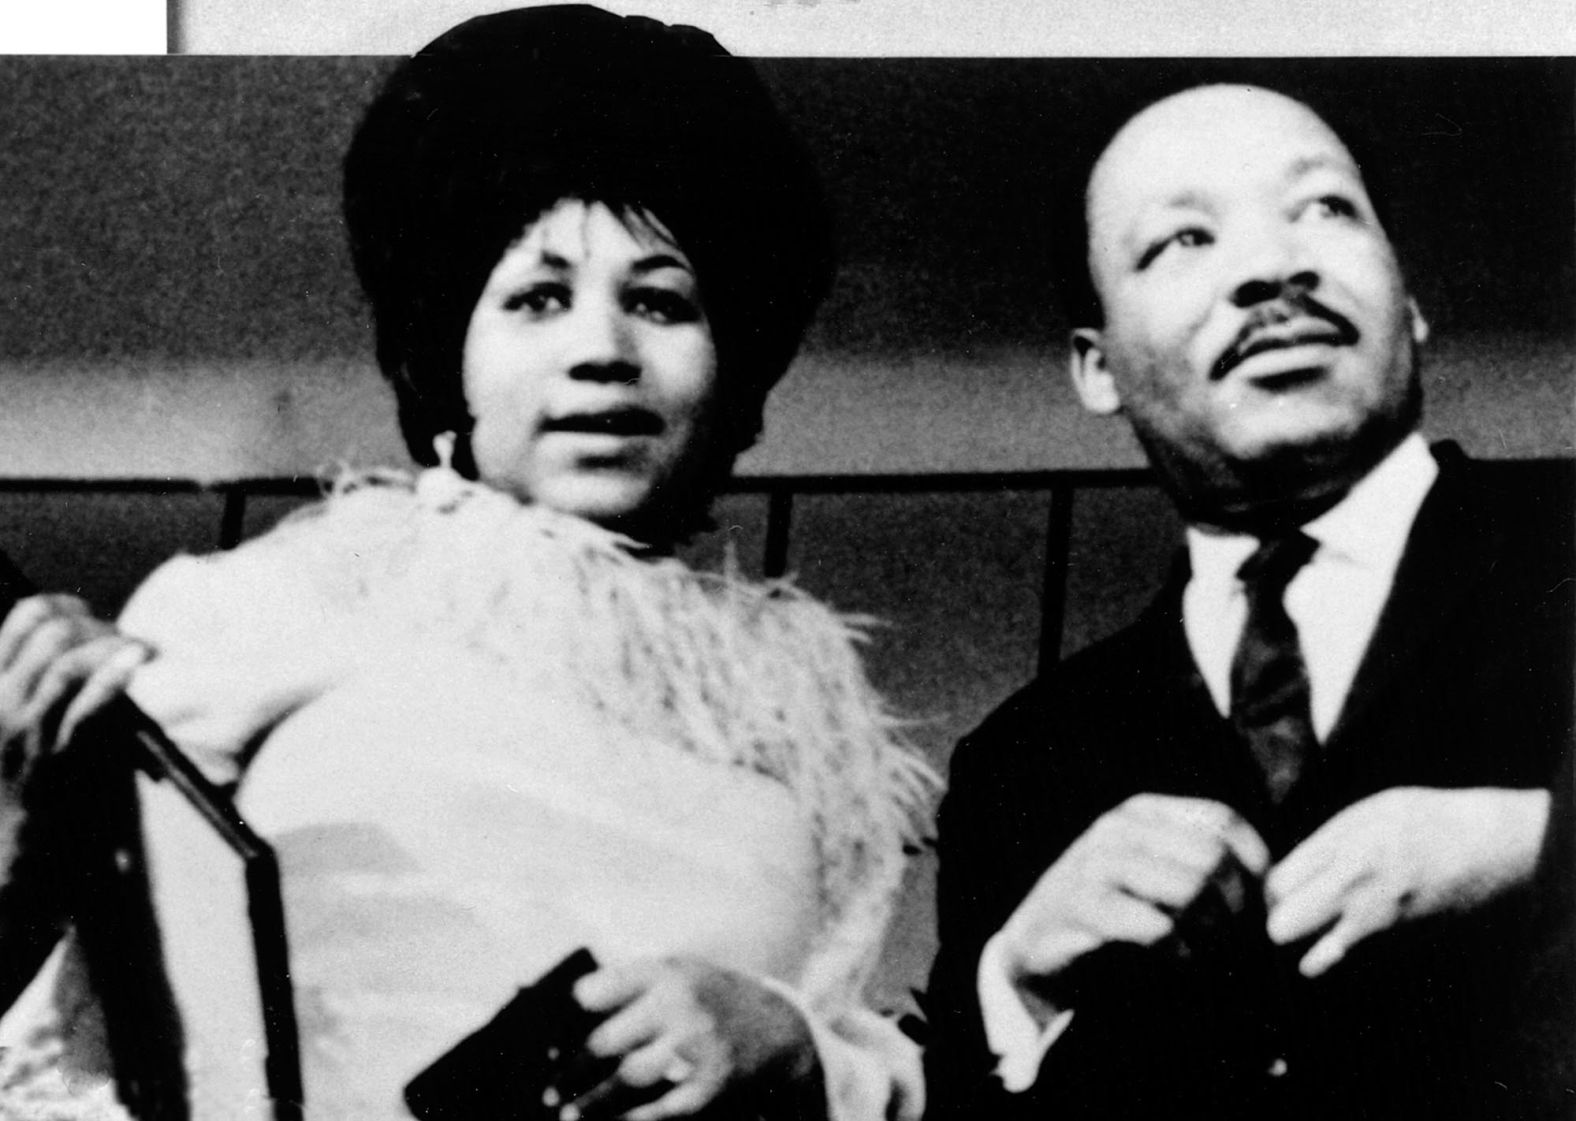 Franklin photographed with Dr. Martin Luther King, Jr. in the late 1960's. In 1968 she was asked to perform at King's funeral, where she sang a stirring rendition of "Precious Lord, Take Thy Hand."